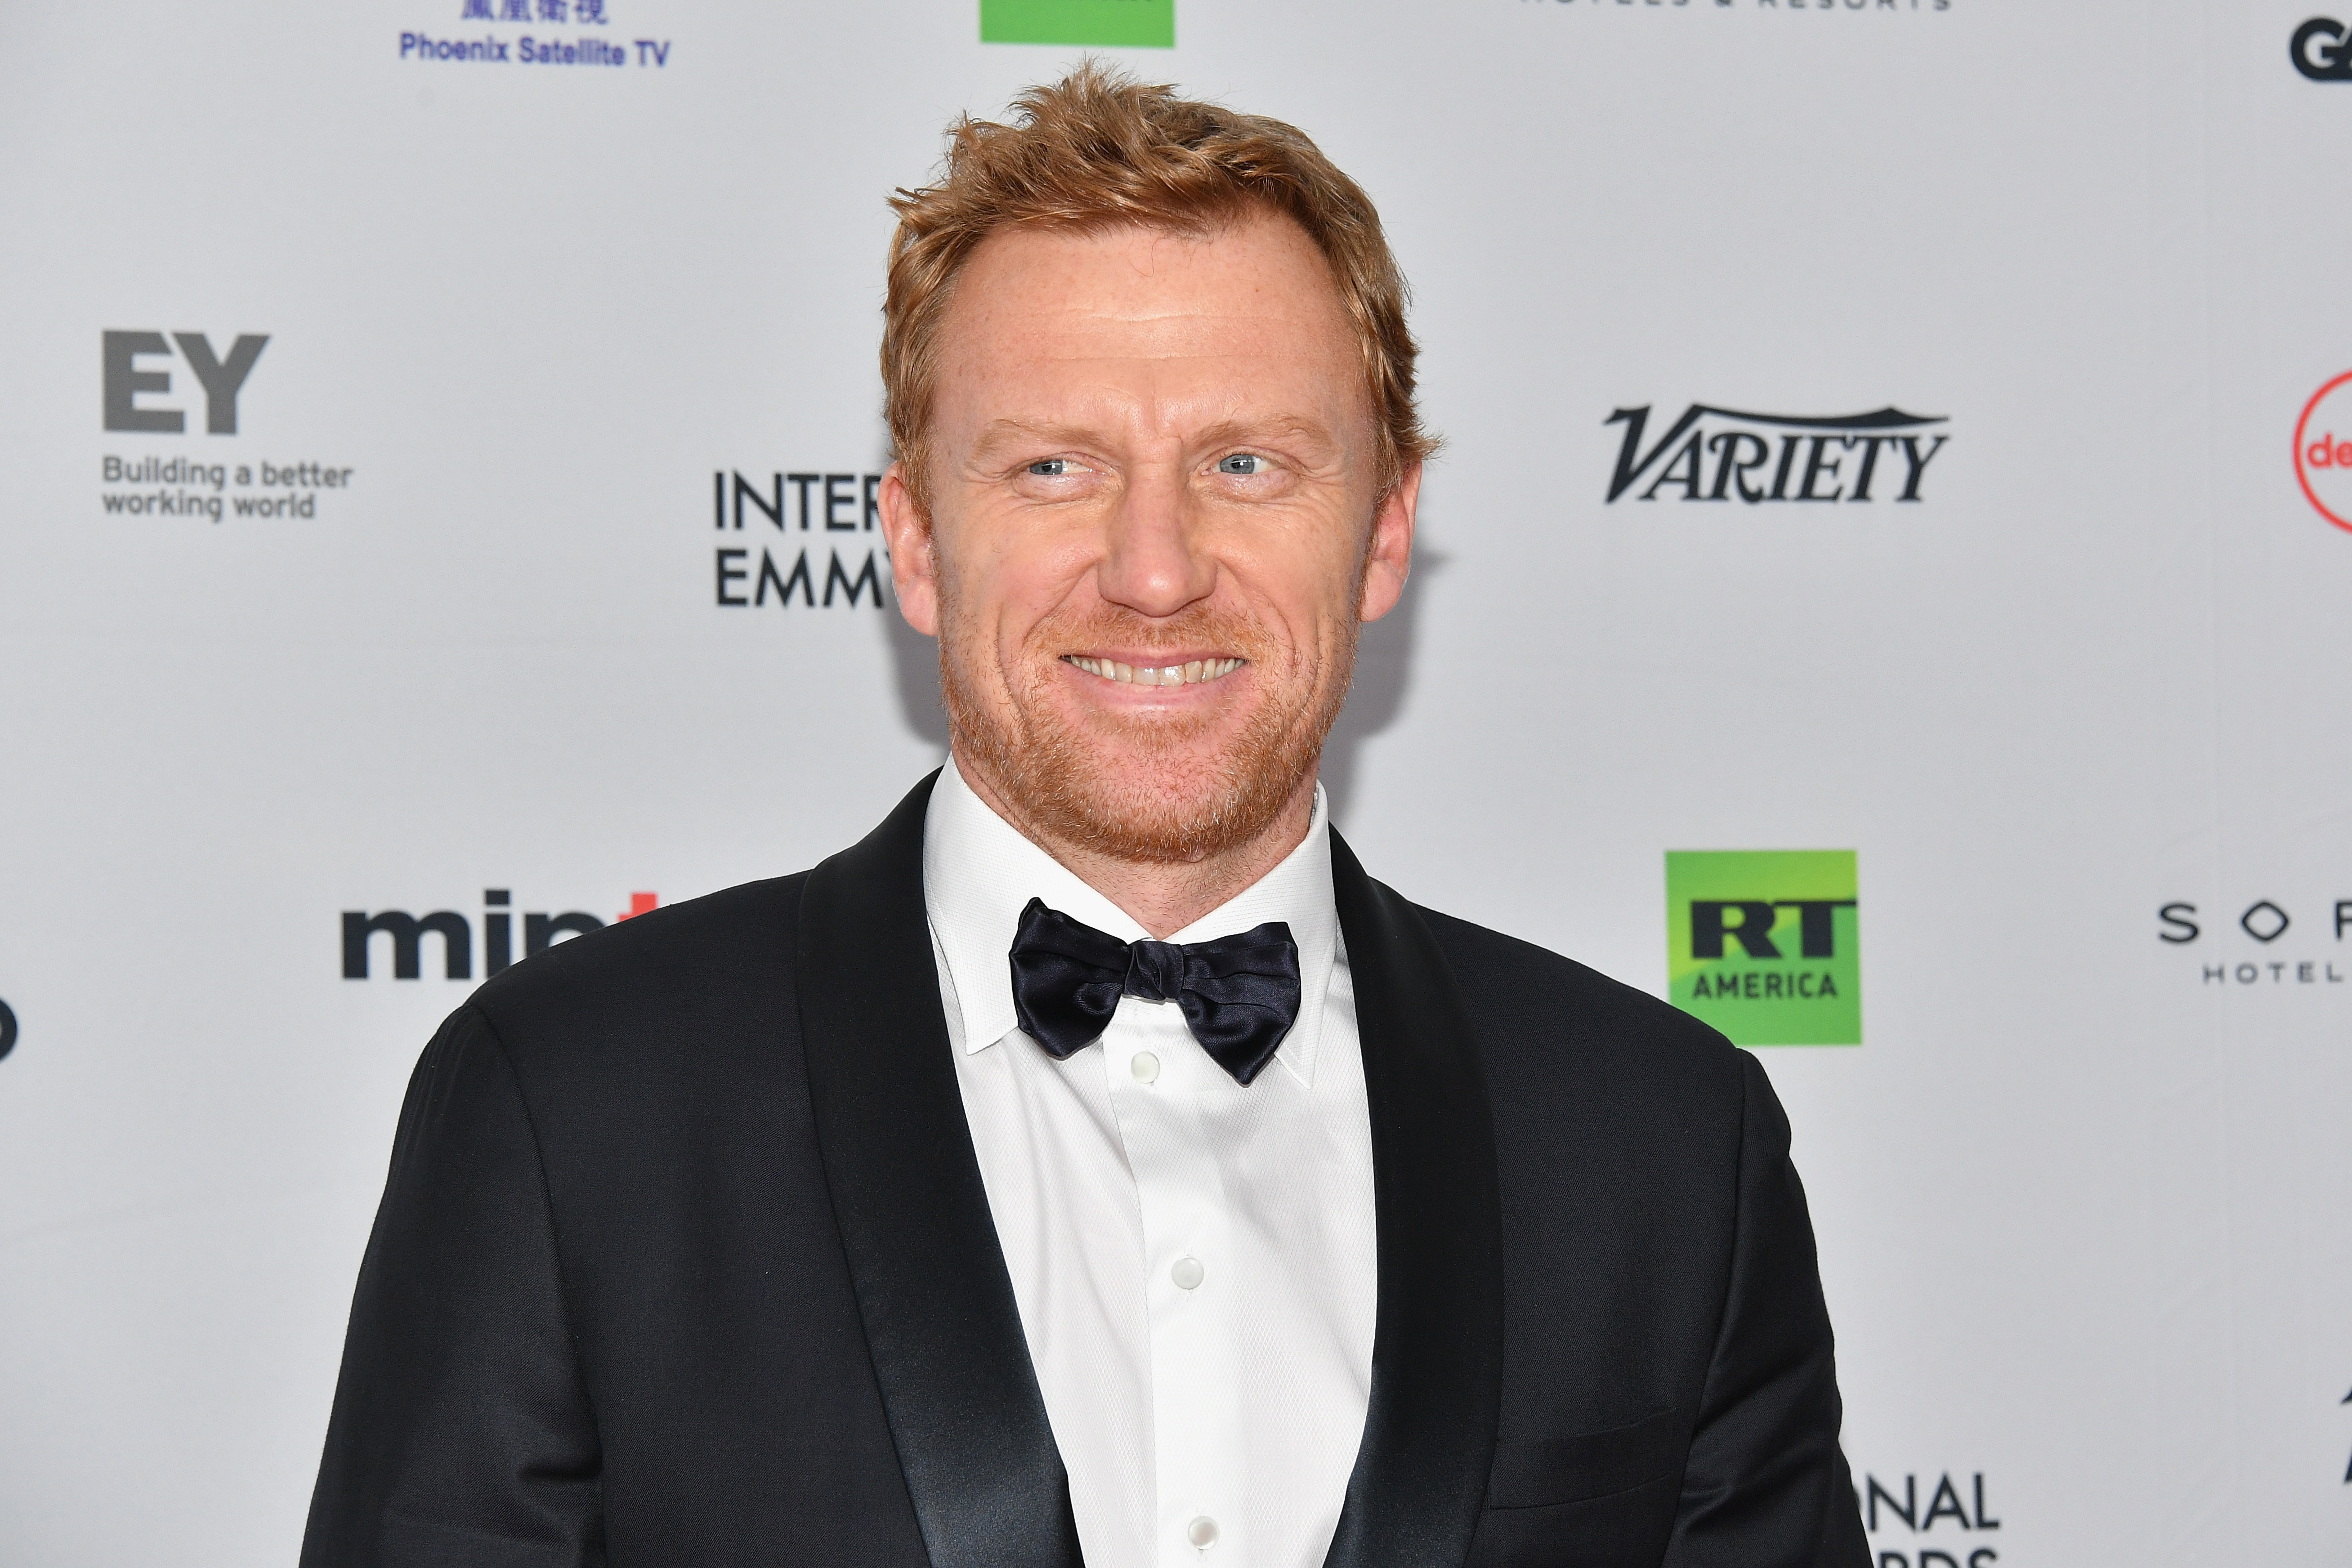 Actor Kevin McKidd attends the 45th International Emmy Awards at New York Hilton, on November 20, 2017, in New York City. | Source: Getty Images